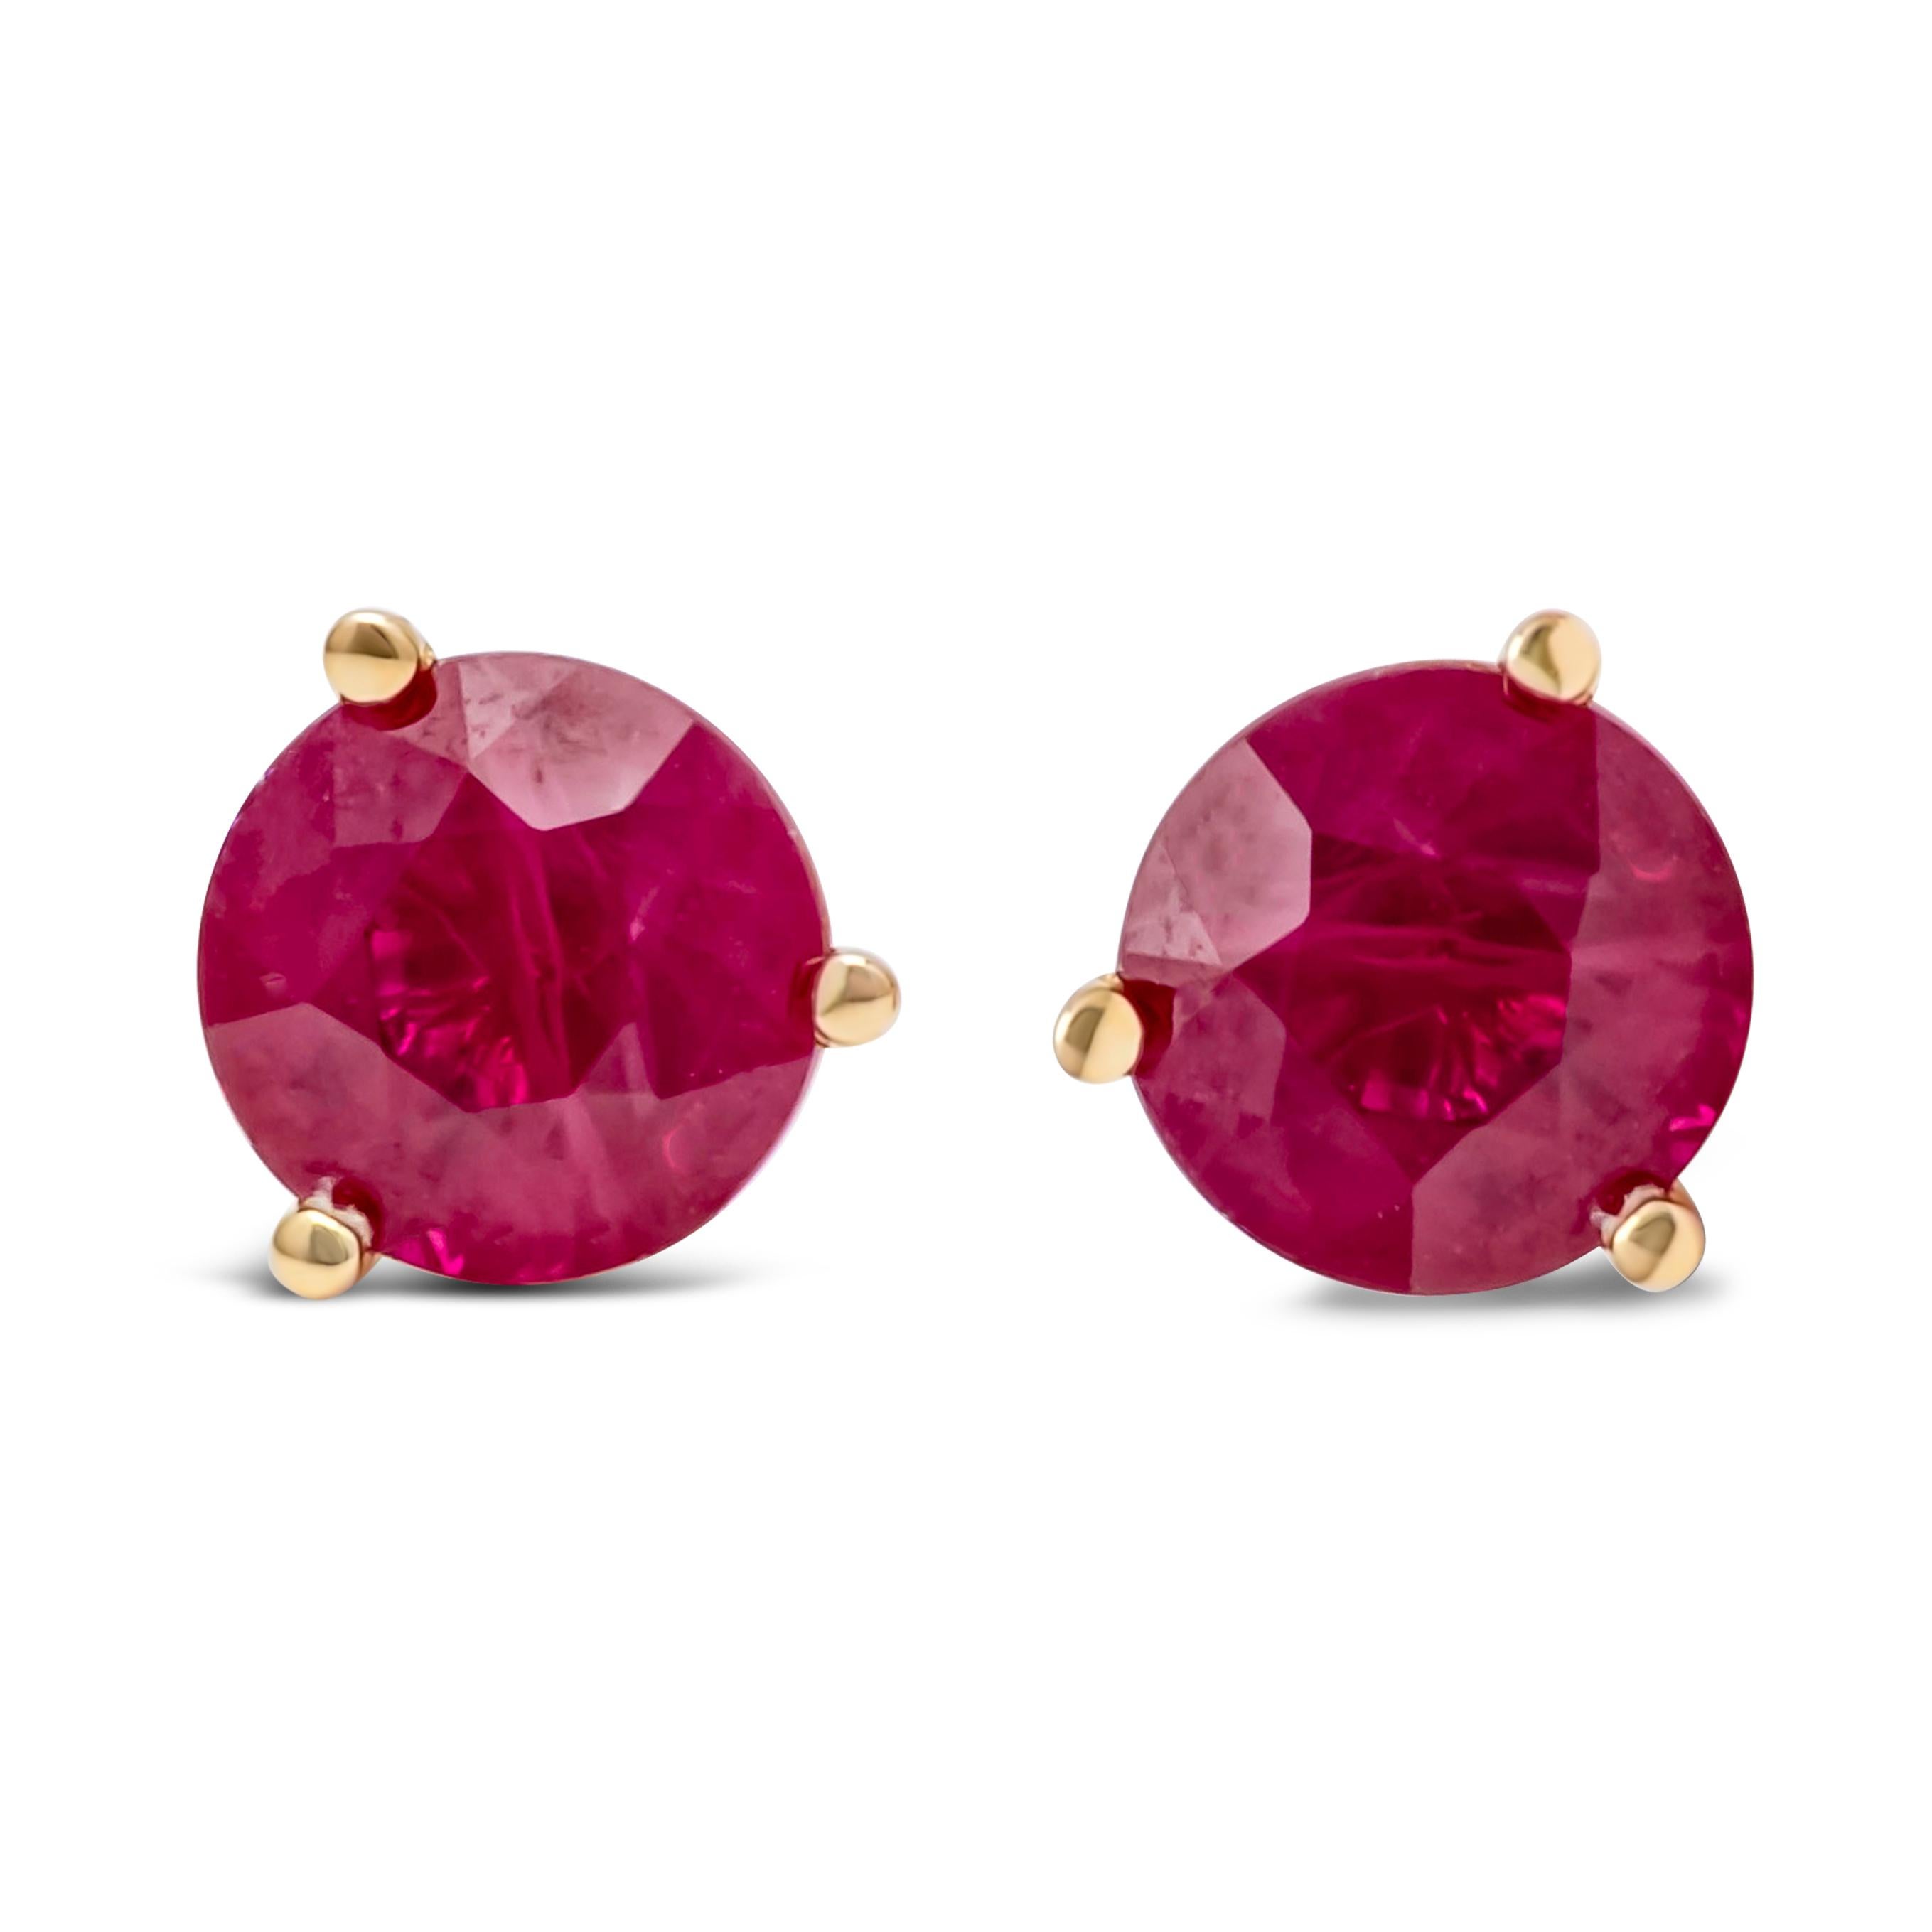 A classic pair of stud earrings showcasing a vibrant red round cut  Burmese rubies weighing 2.10 carats total. Set in a timeless three prong push back setting and Finely made in 18k yellow gold.

Style available in different price ranges. Prices are